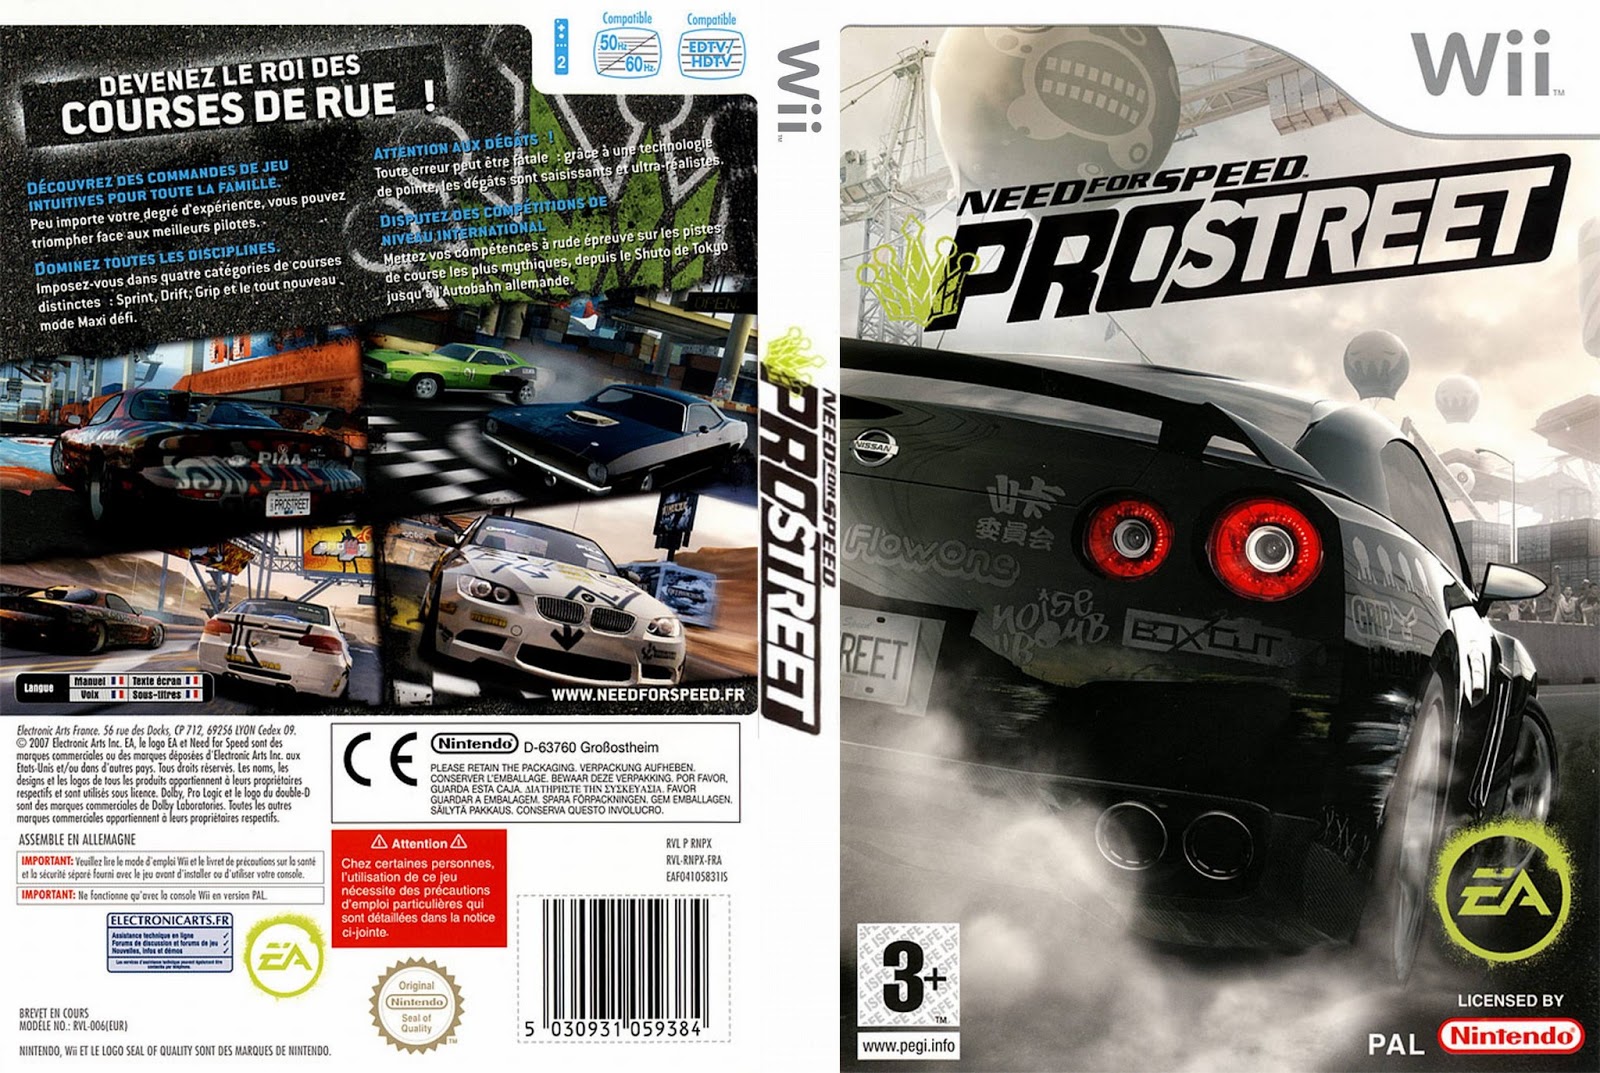 need for speed most wanted download pc completo portugues